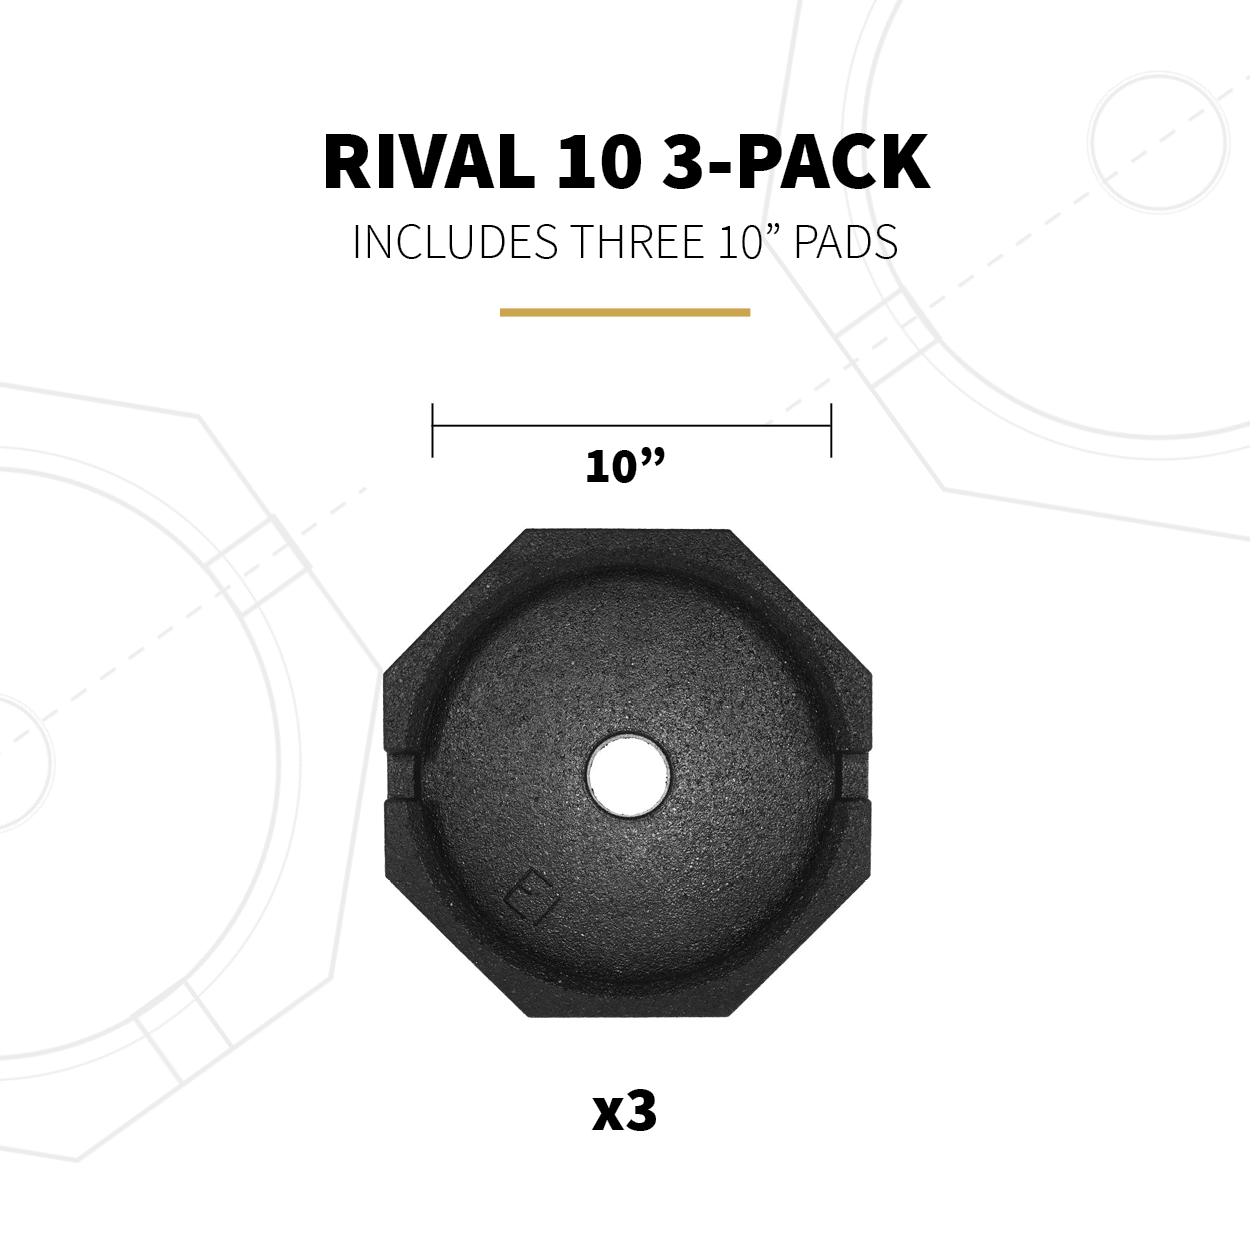 Rival 10 3-Pack Specs